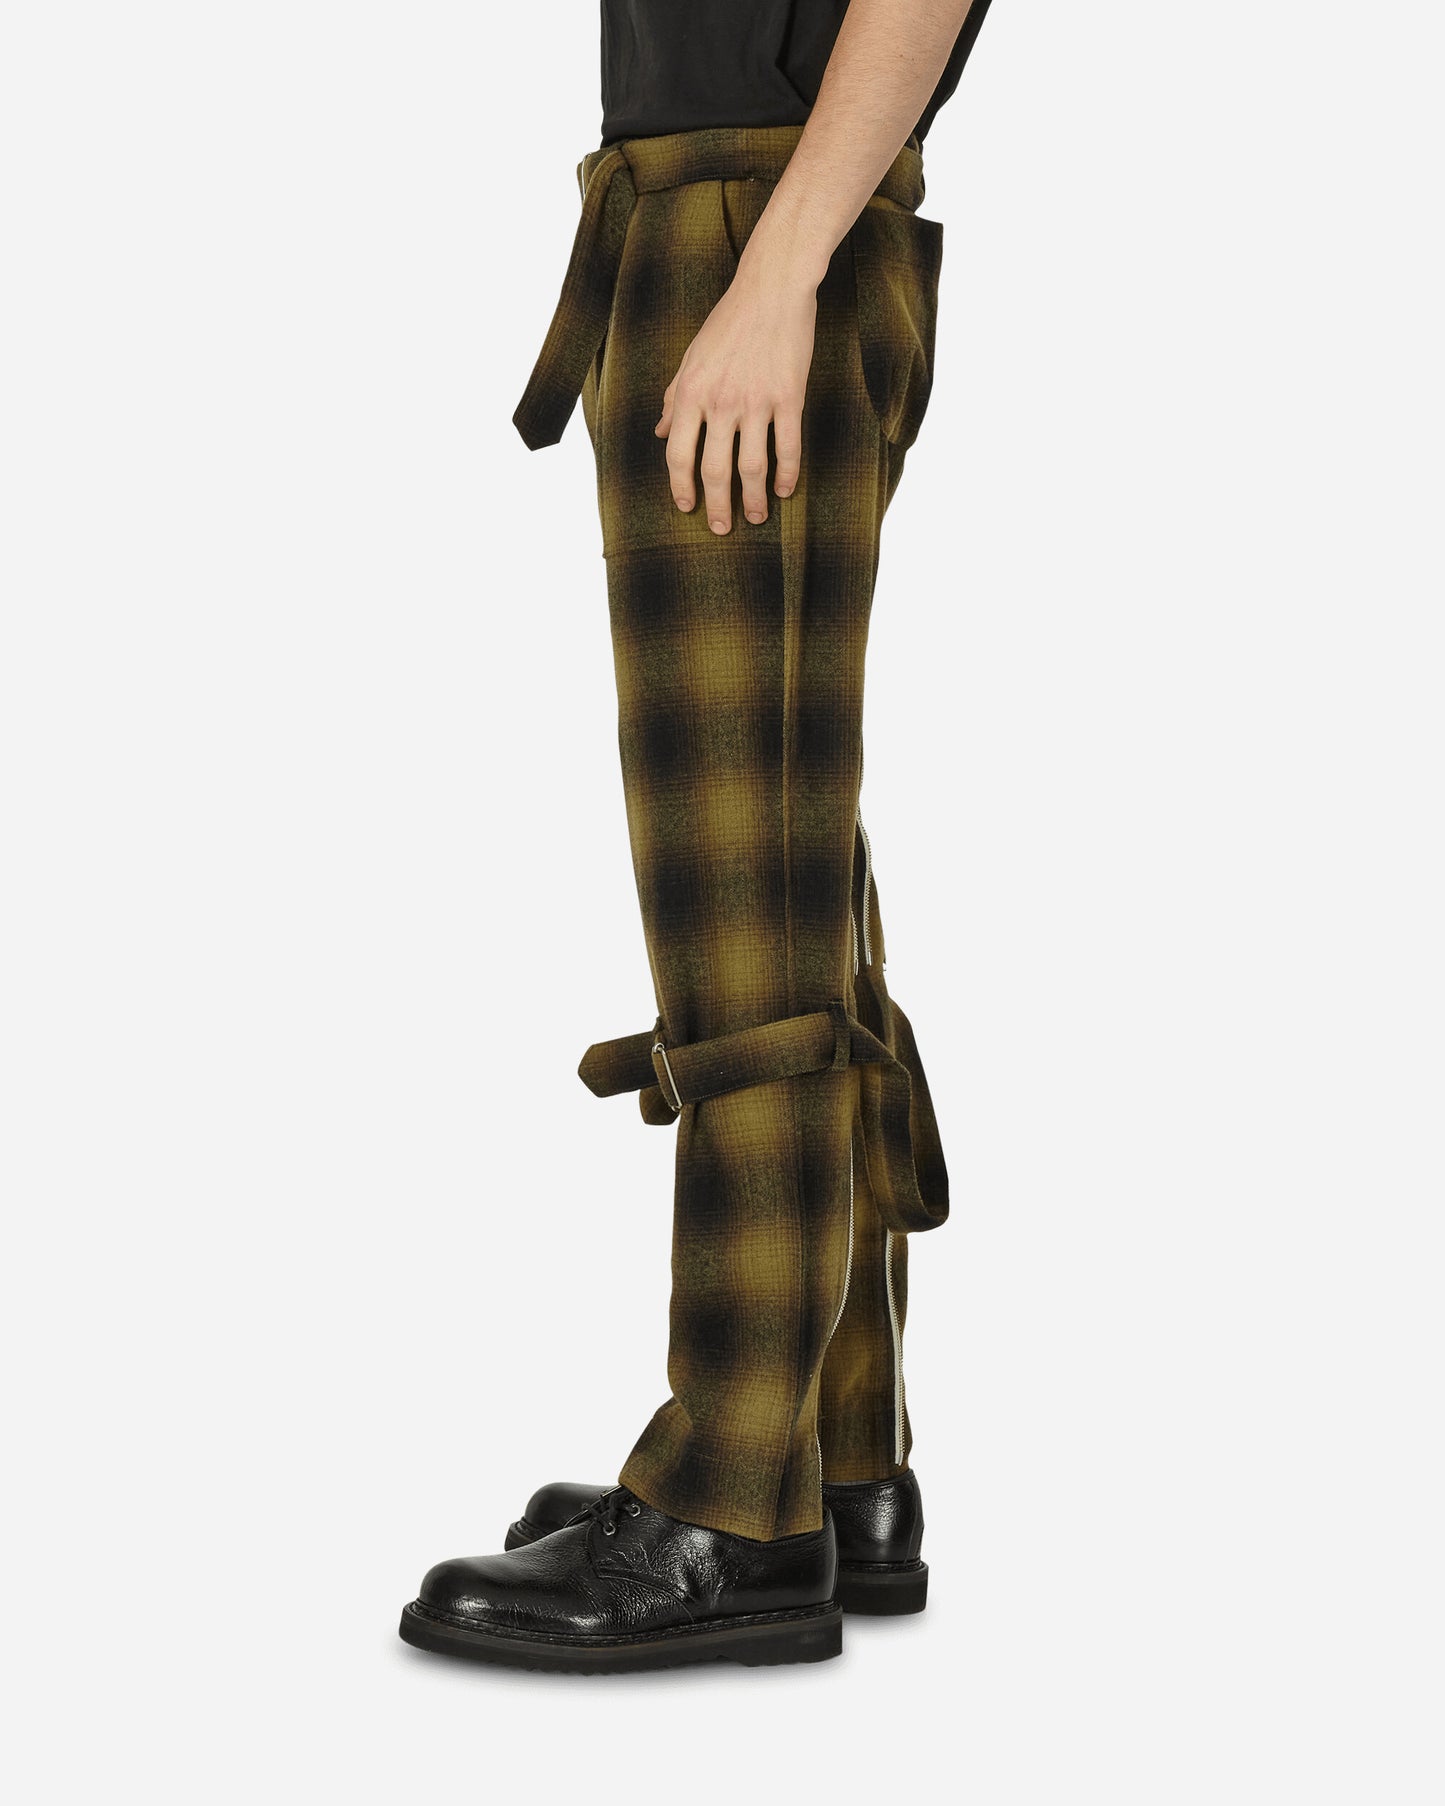 Phingerin Bontage Pants Wool Ombre Yellow Plaid Pants Trousers PD-232-BT-042 A